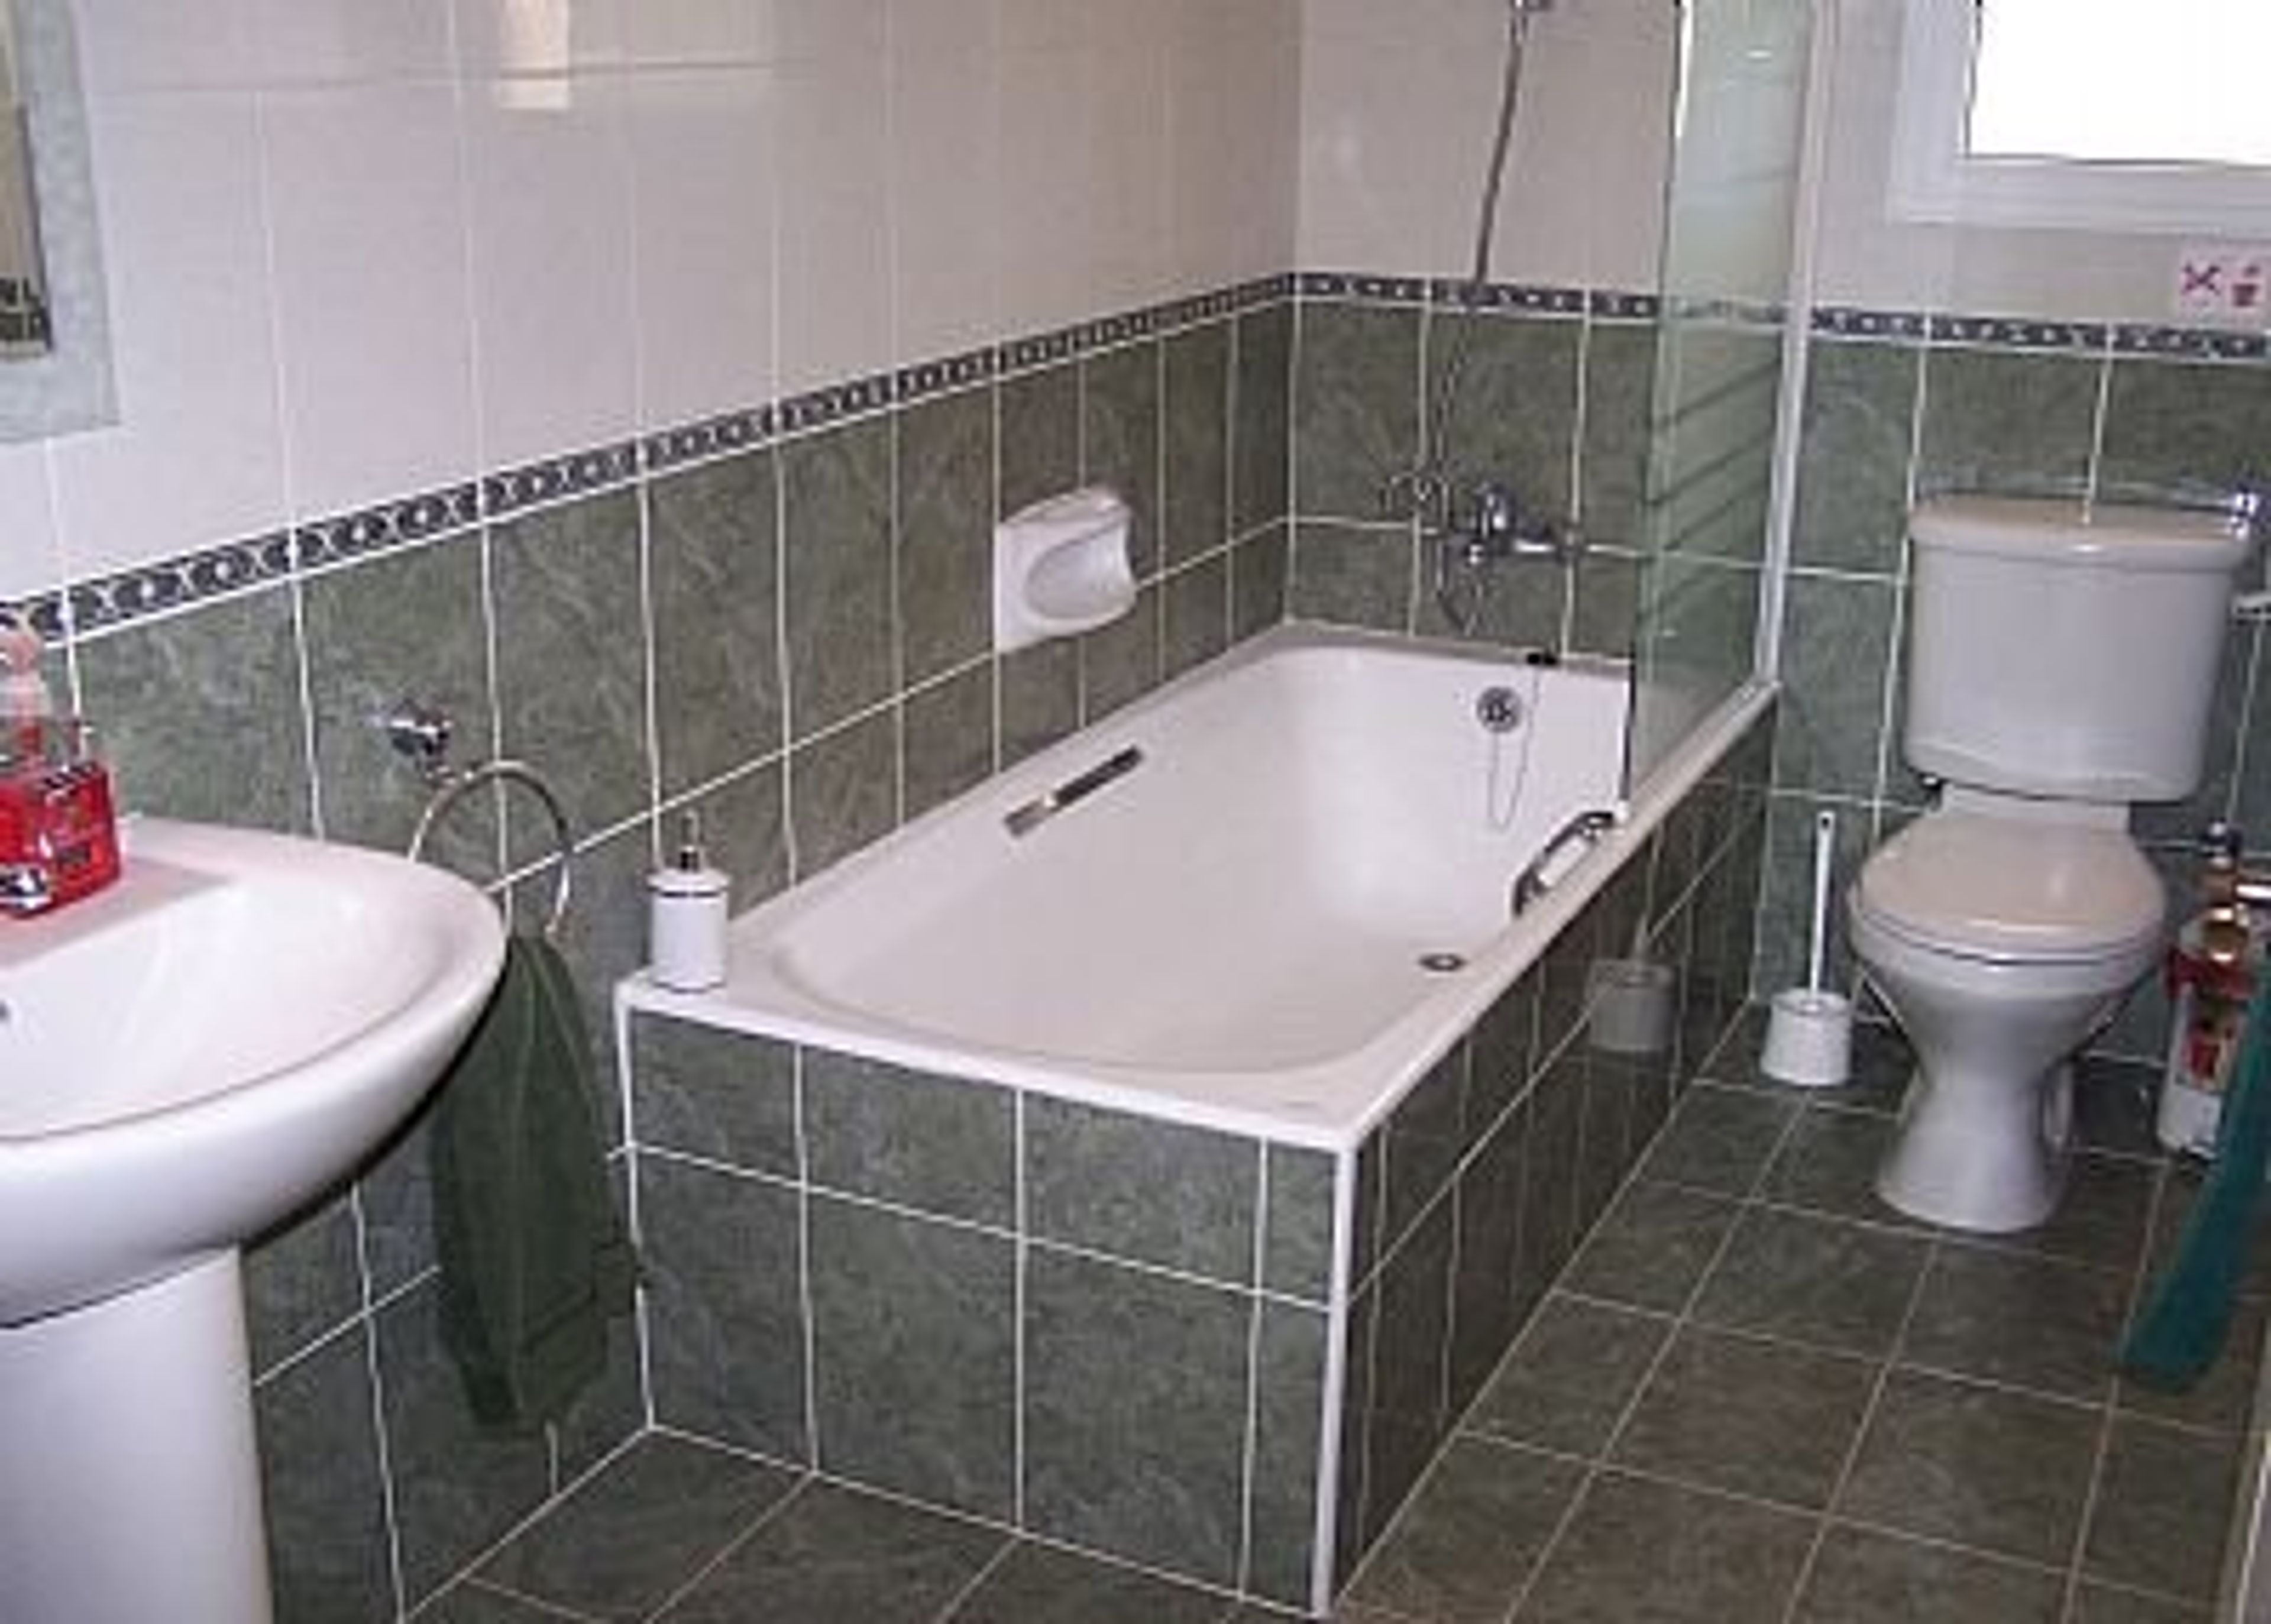 One of the two bathrooms